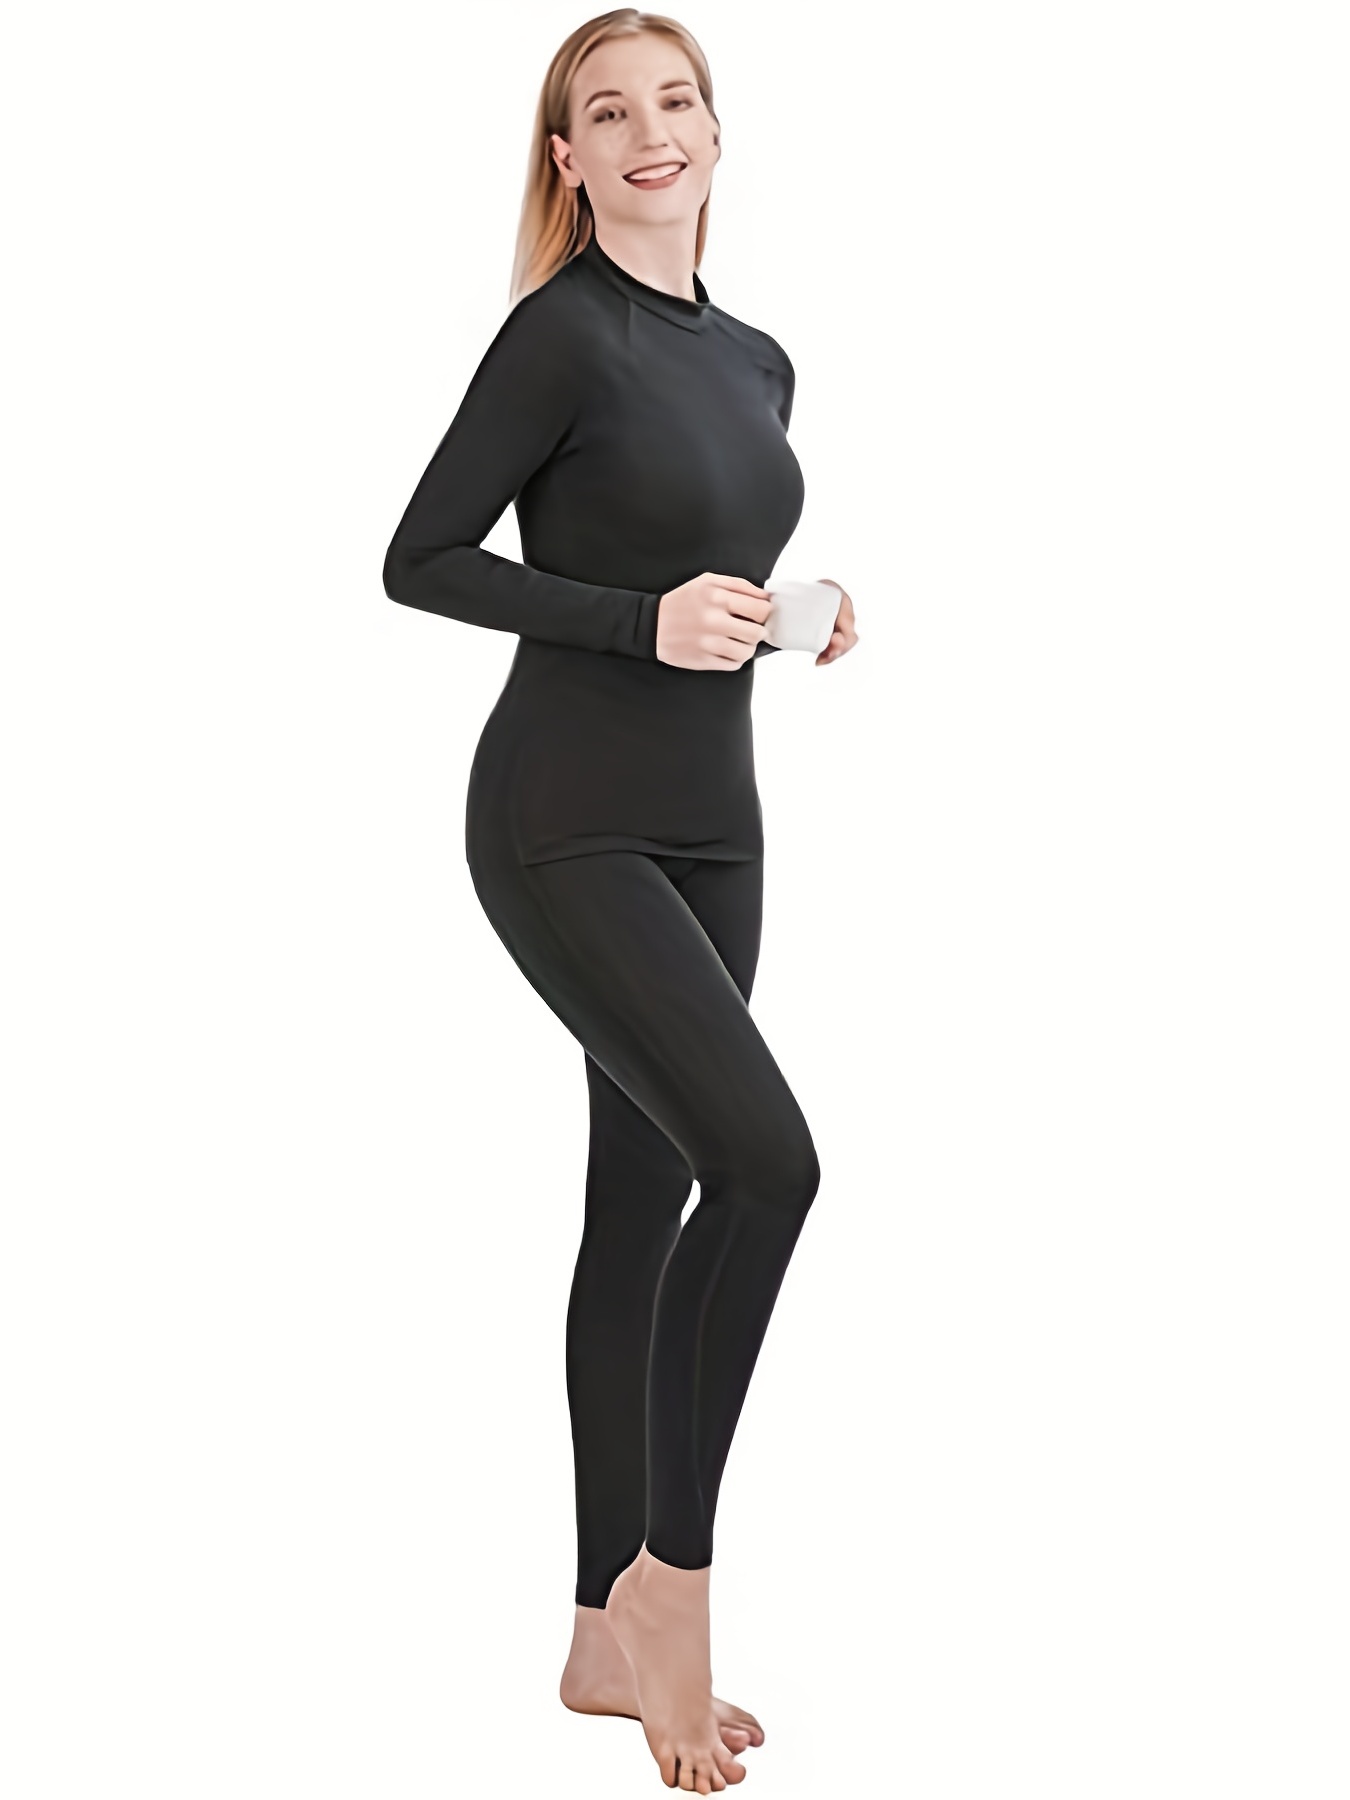 Is It Possible to Wear a Base Layer Alone?– Thermajane